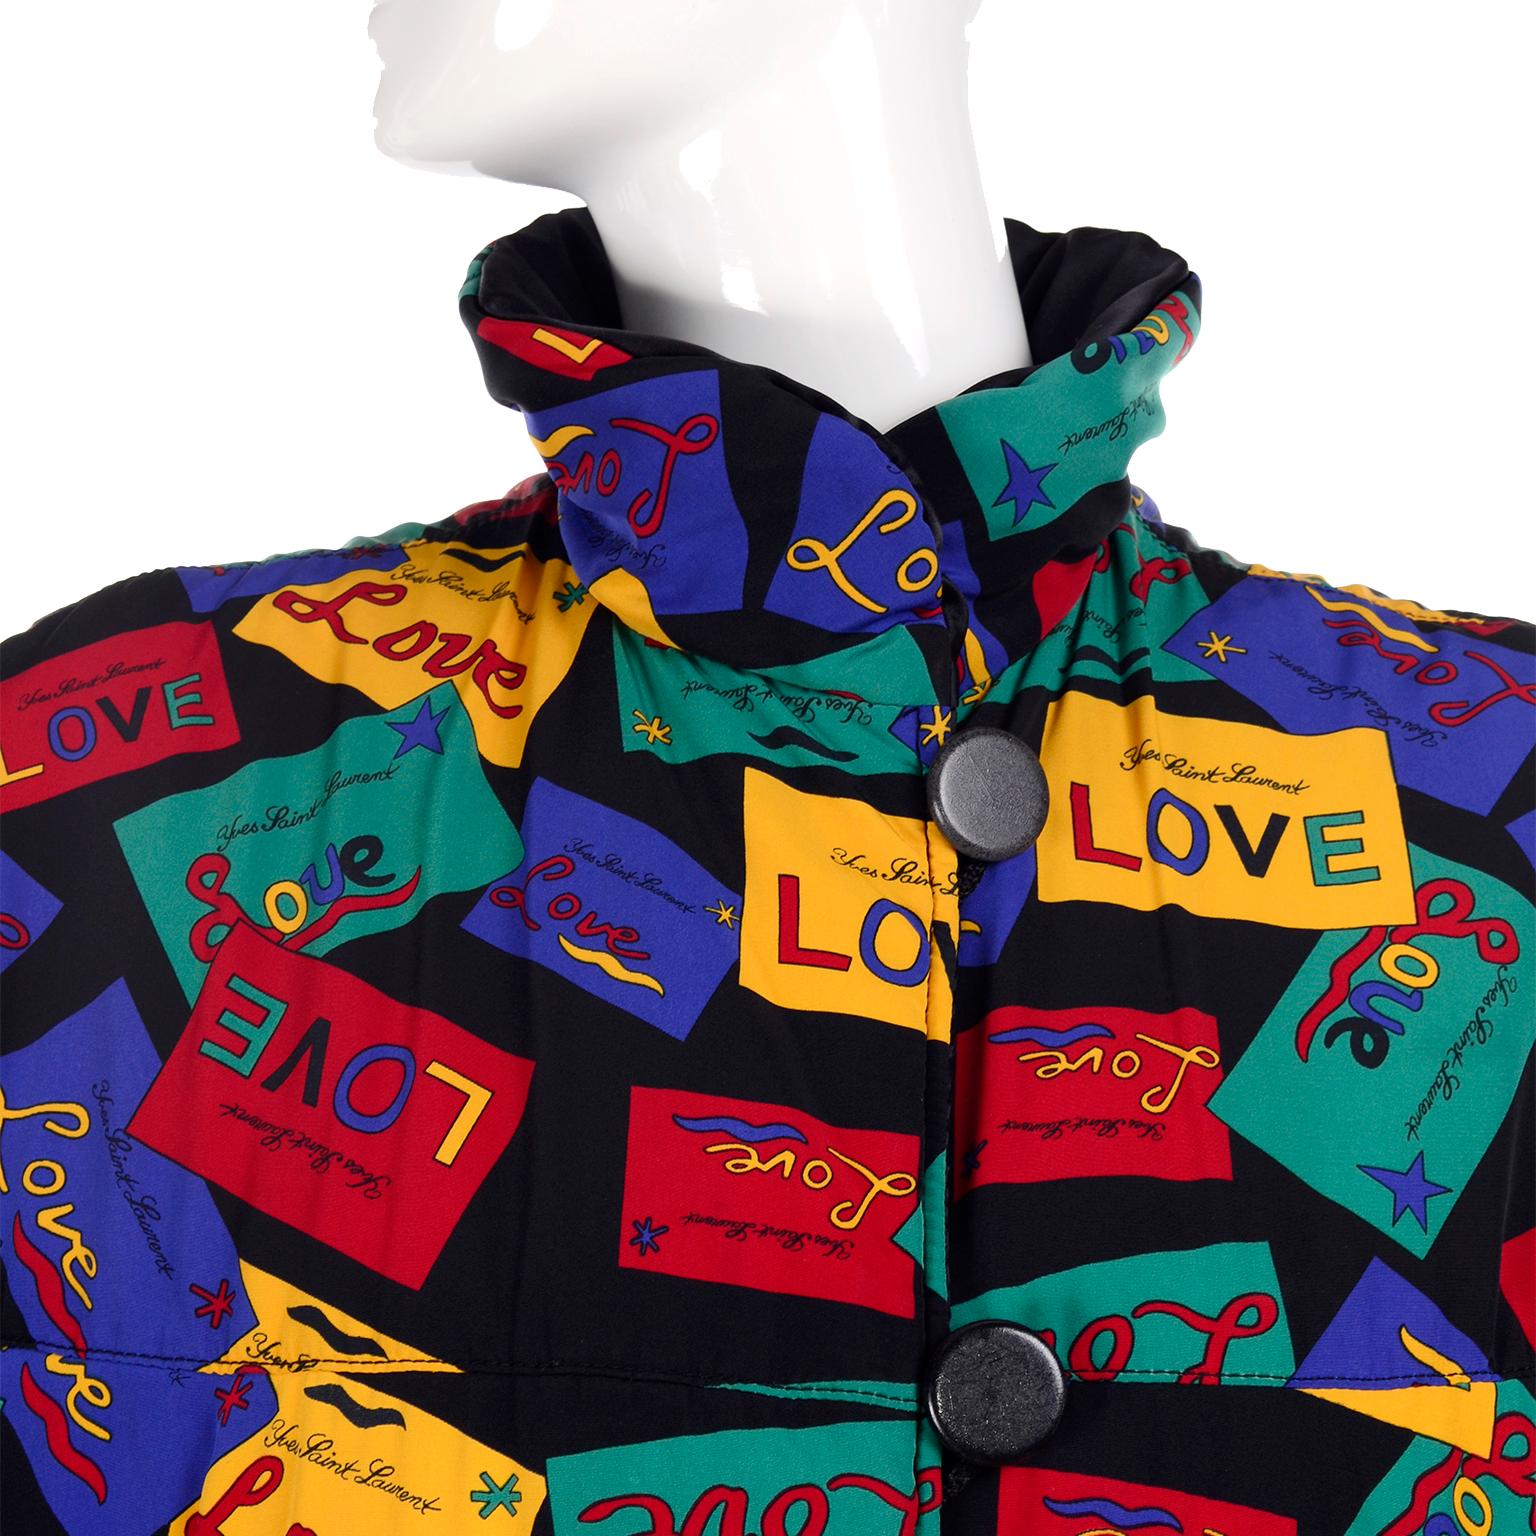 This is a great 1980's reversible puffy jacket with YSL's signature LOVE designs. We love vintage YSL and were thrilled to be asked to handle an estate of wonderful vintage Yves Saint Laurent pieces from the 1970's, 1980's and early 1990's. This